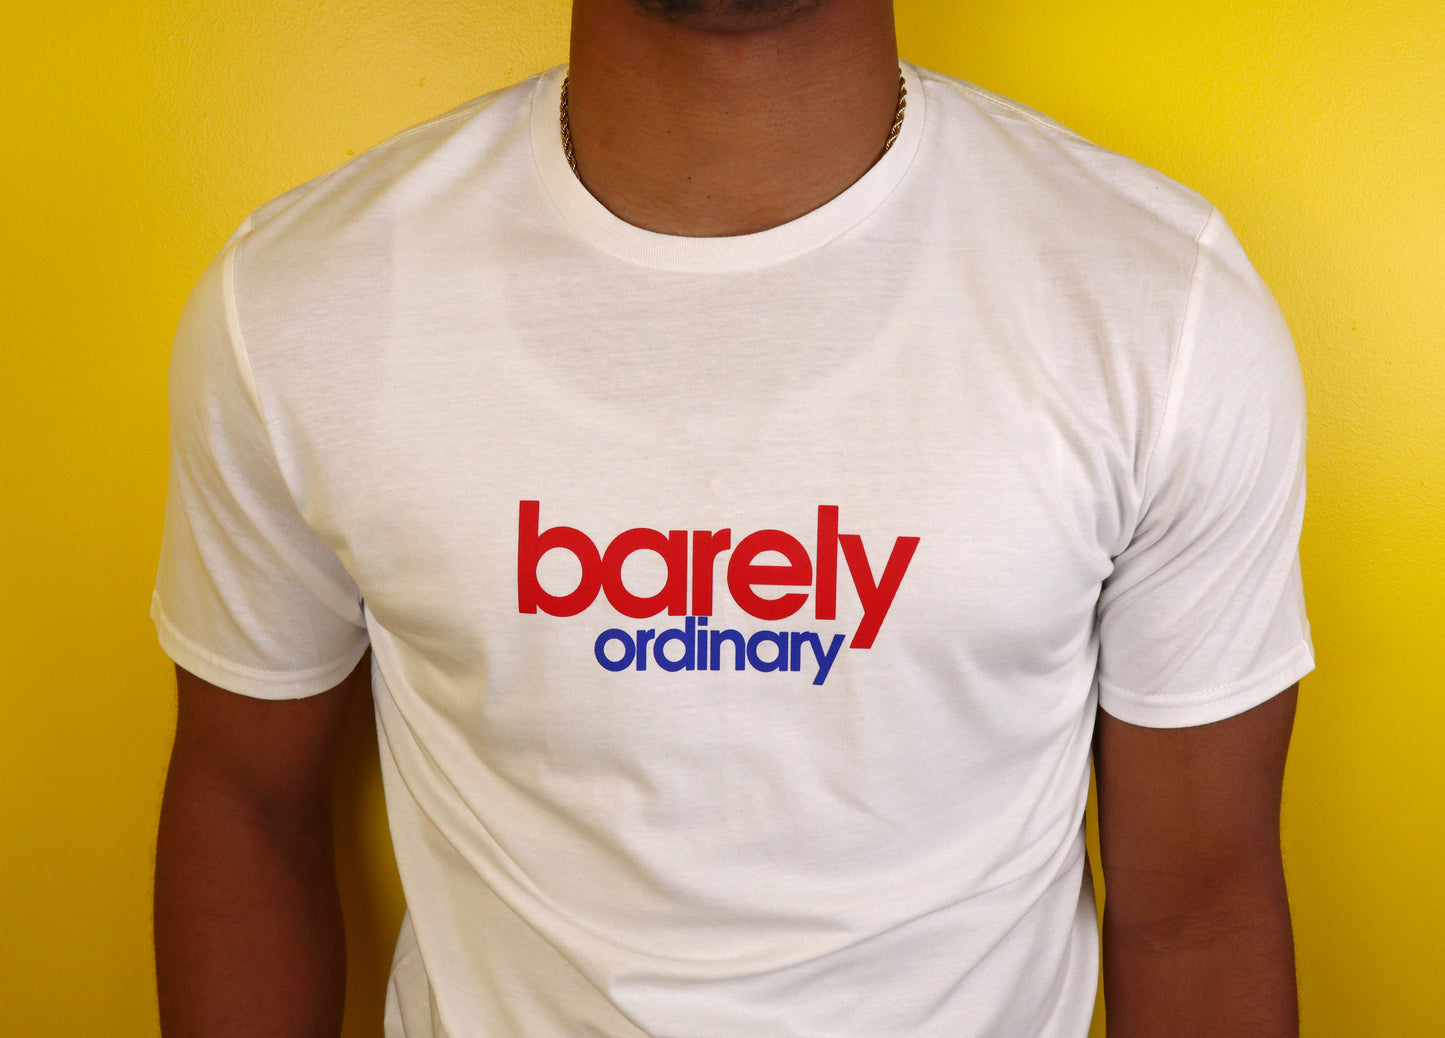 Barely "Stamped" Logo Tee (Red/Blu)